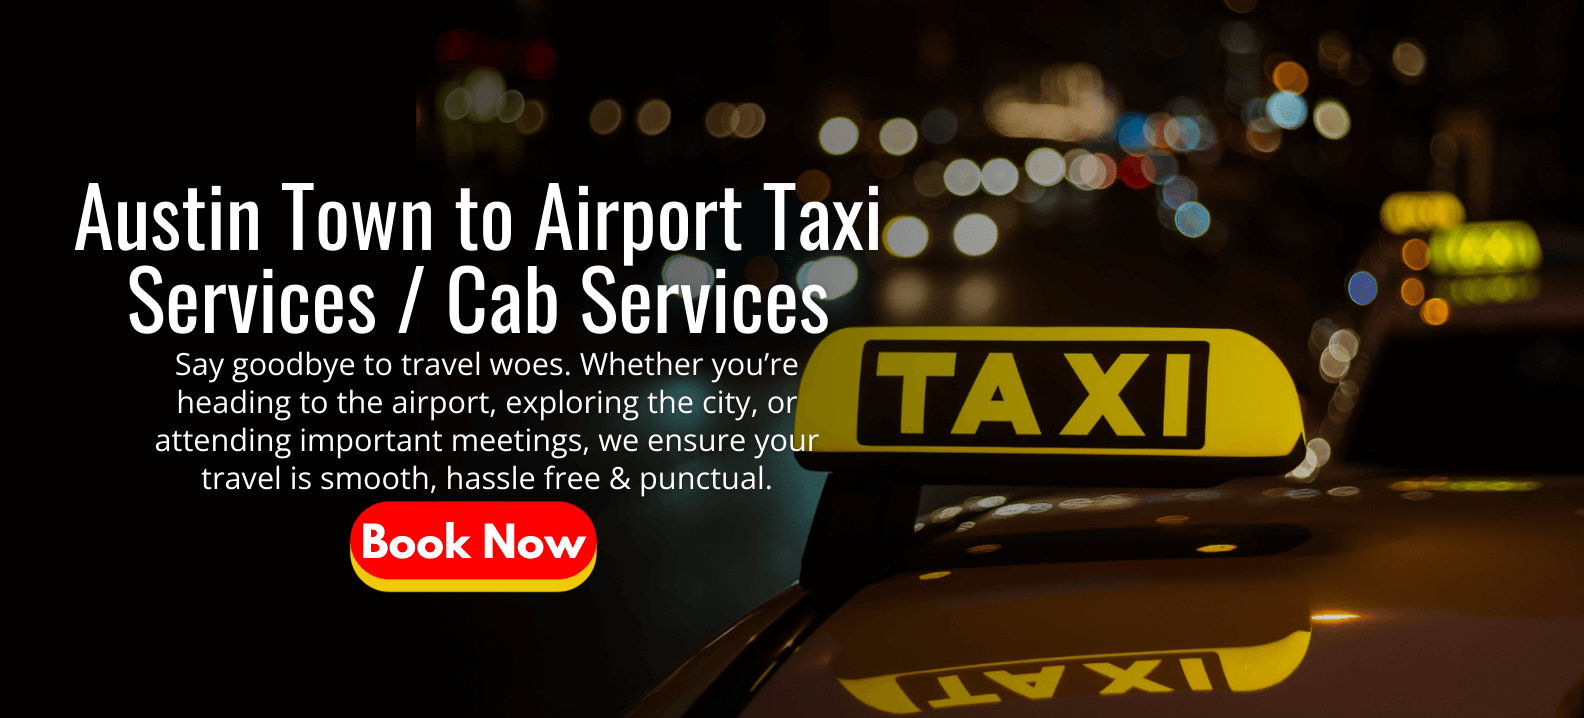 Austin Town to Airport Taxi Services _ Cab Services